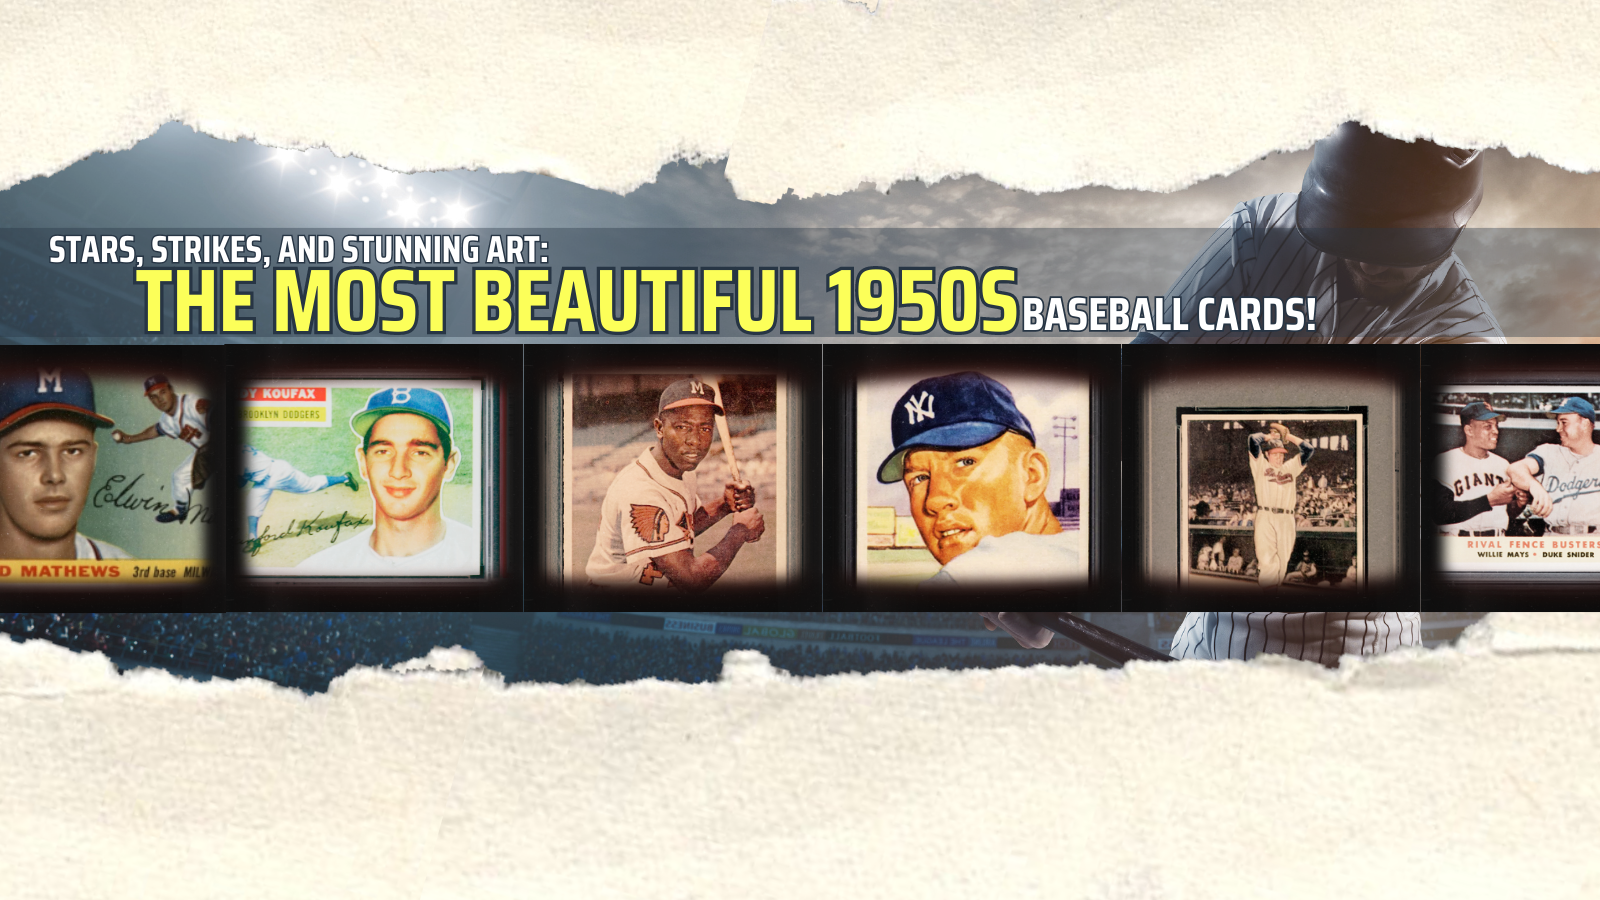 Baseball Cards of the 1950s: A Kid's View Looking Back